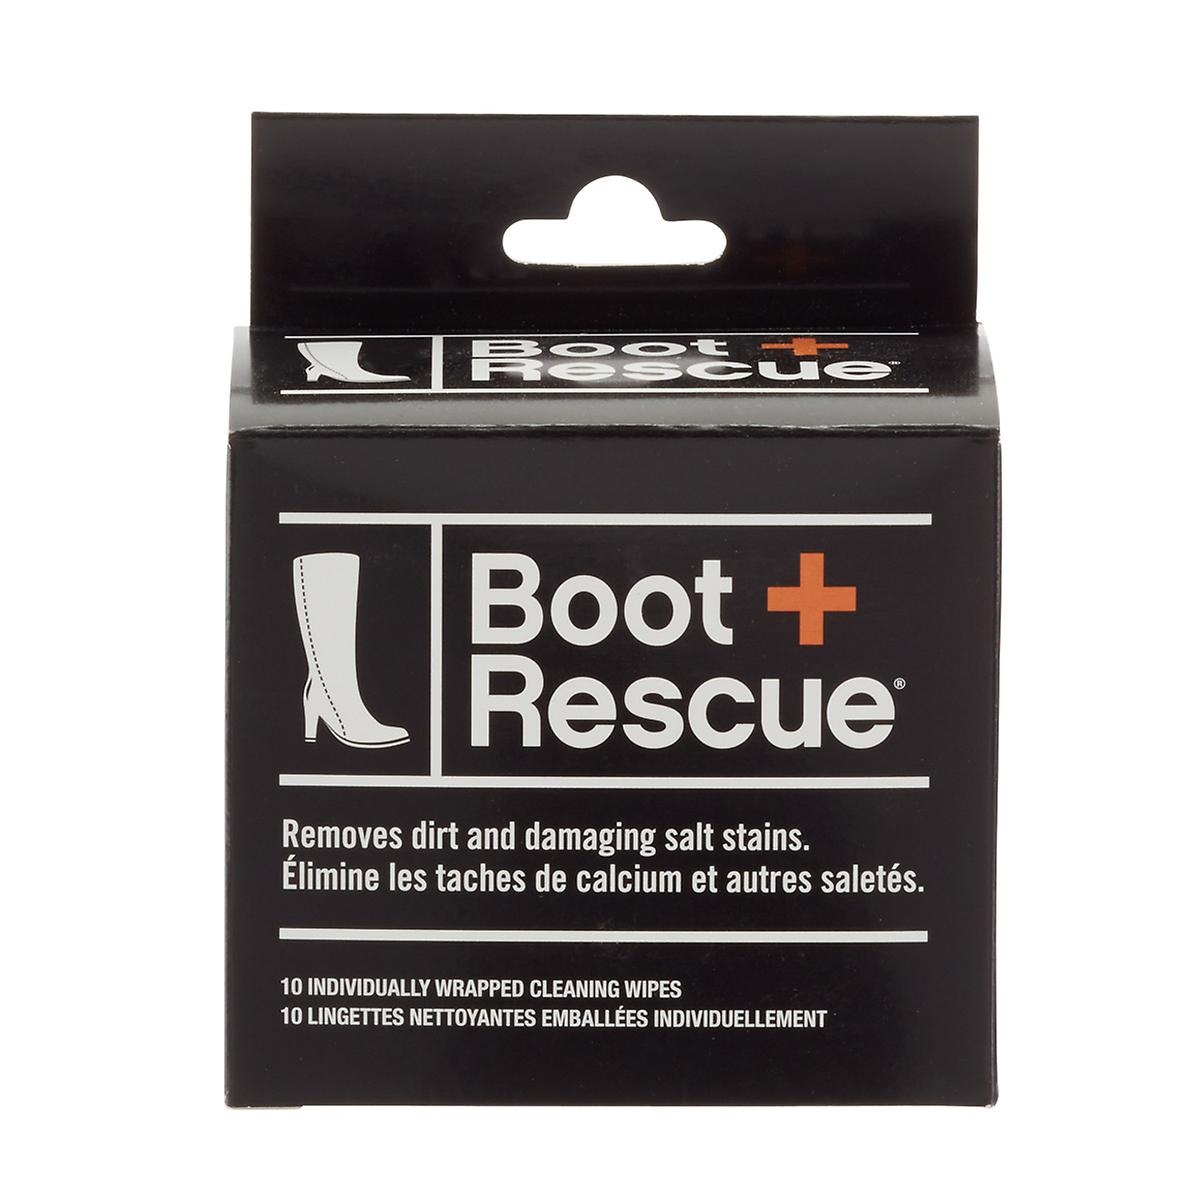 Boot Rescue works magic on boots, handbags and leather jackets, saving you a ton on cleaning bills